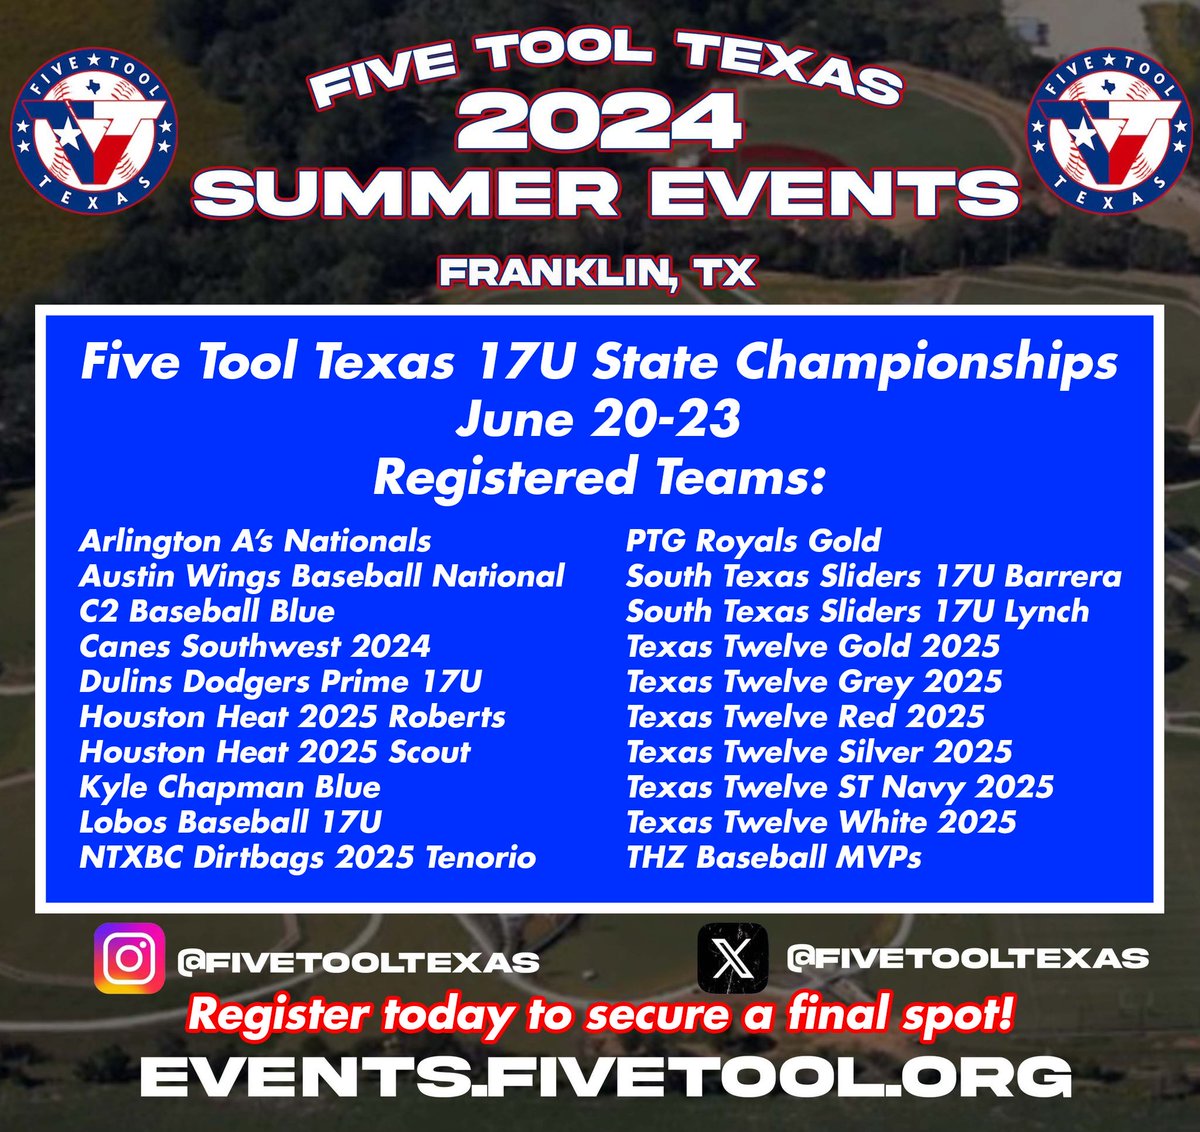 The @FiveTool Texas 17U State Championships has been opened up to accommodate 8 additional teams. 🗓️June 20-23 📍Franklin, TX 📱Full social media coverage Sign up today to secure the last few spots » events.fivetool.org/events/five-to… #WatchEm